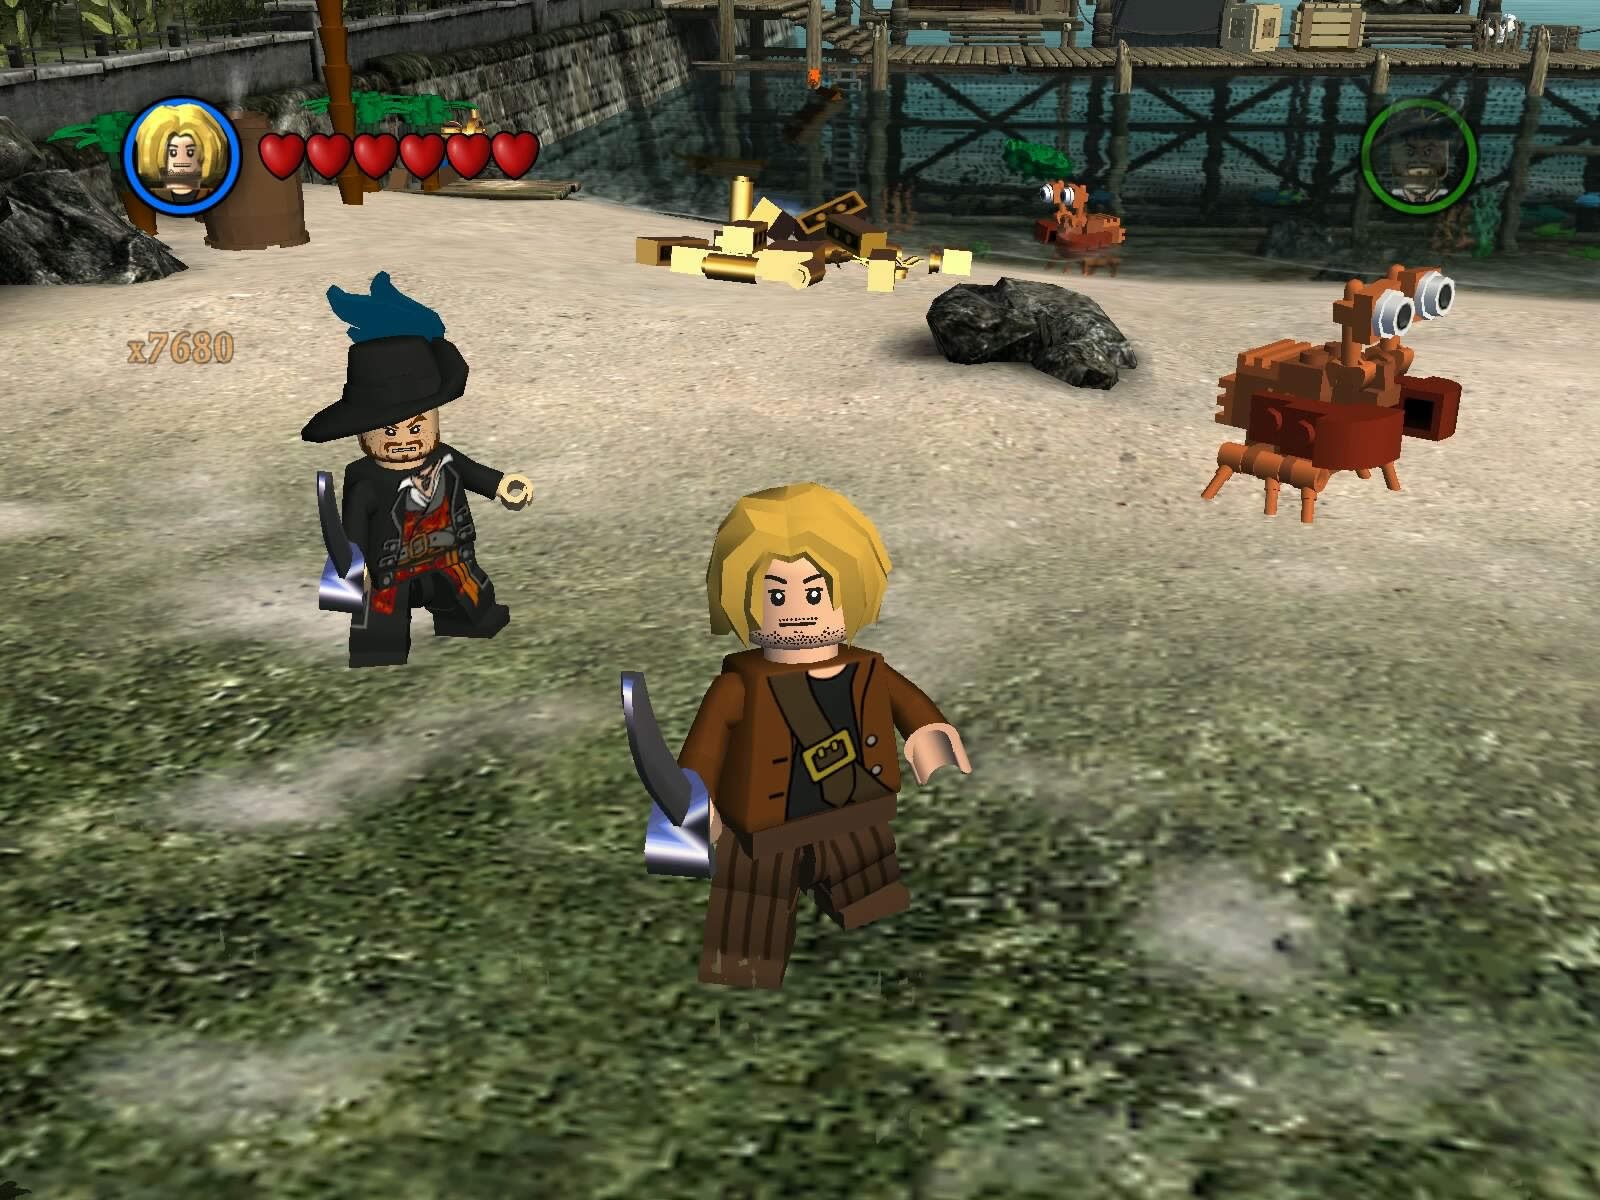 LEGO Pirates Of The Caribbean: The Video Game #25